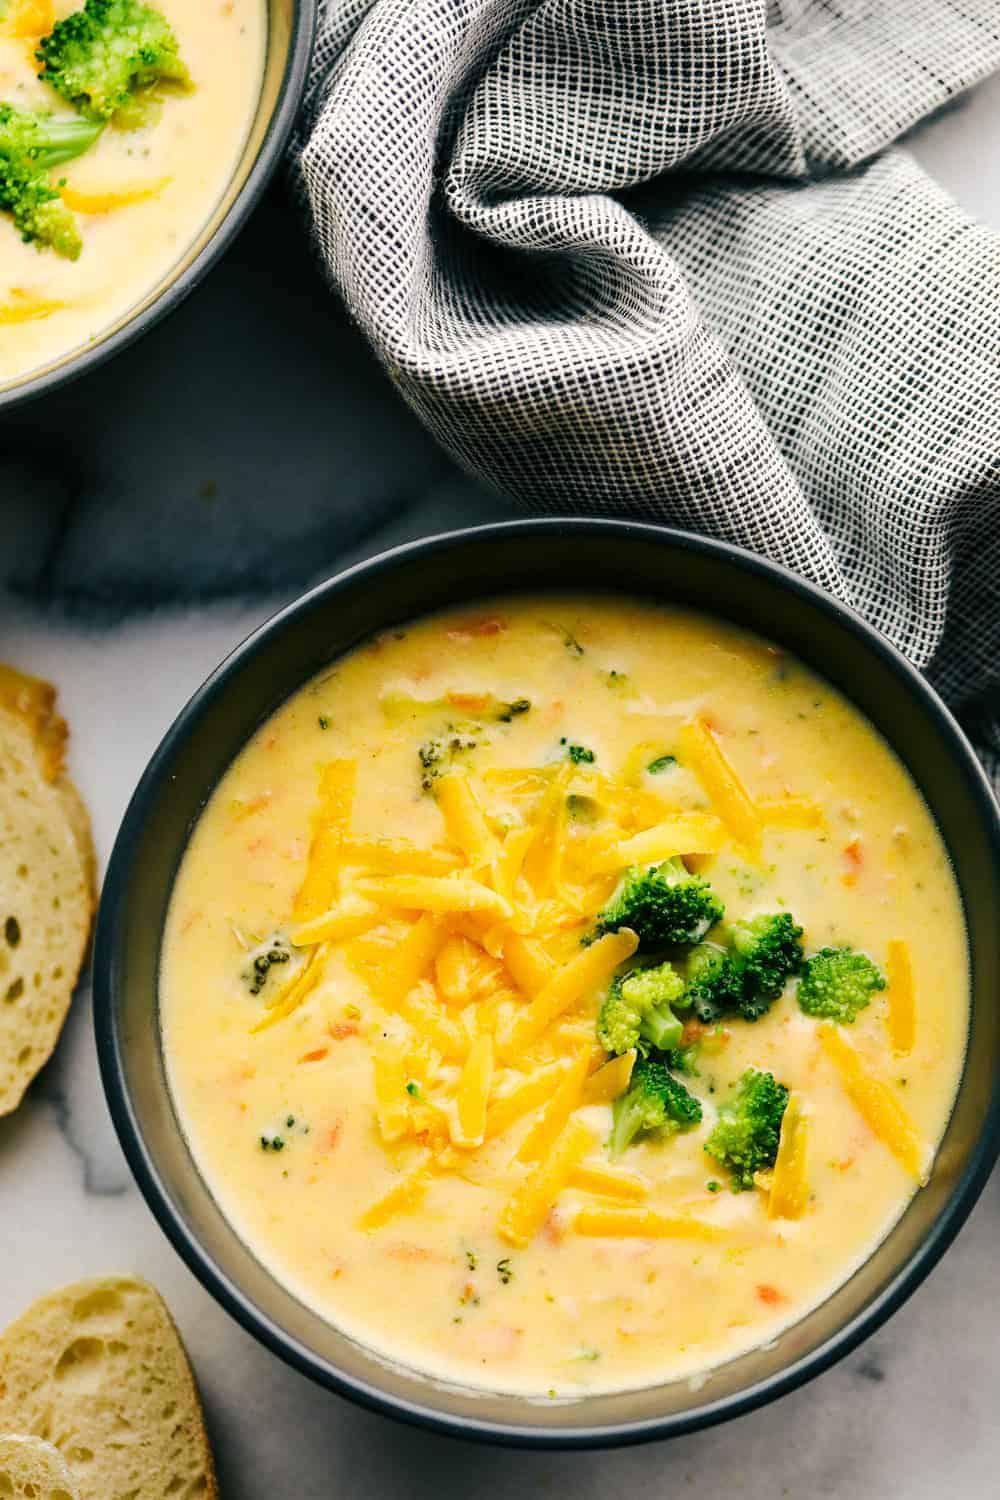 The Best Rich and Creamy Broccoli Cheese Soup Recipe